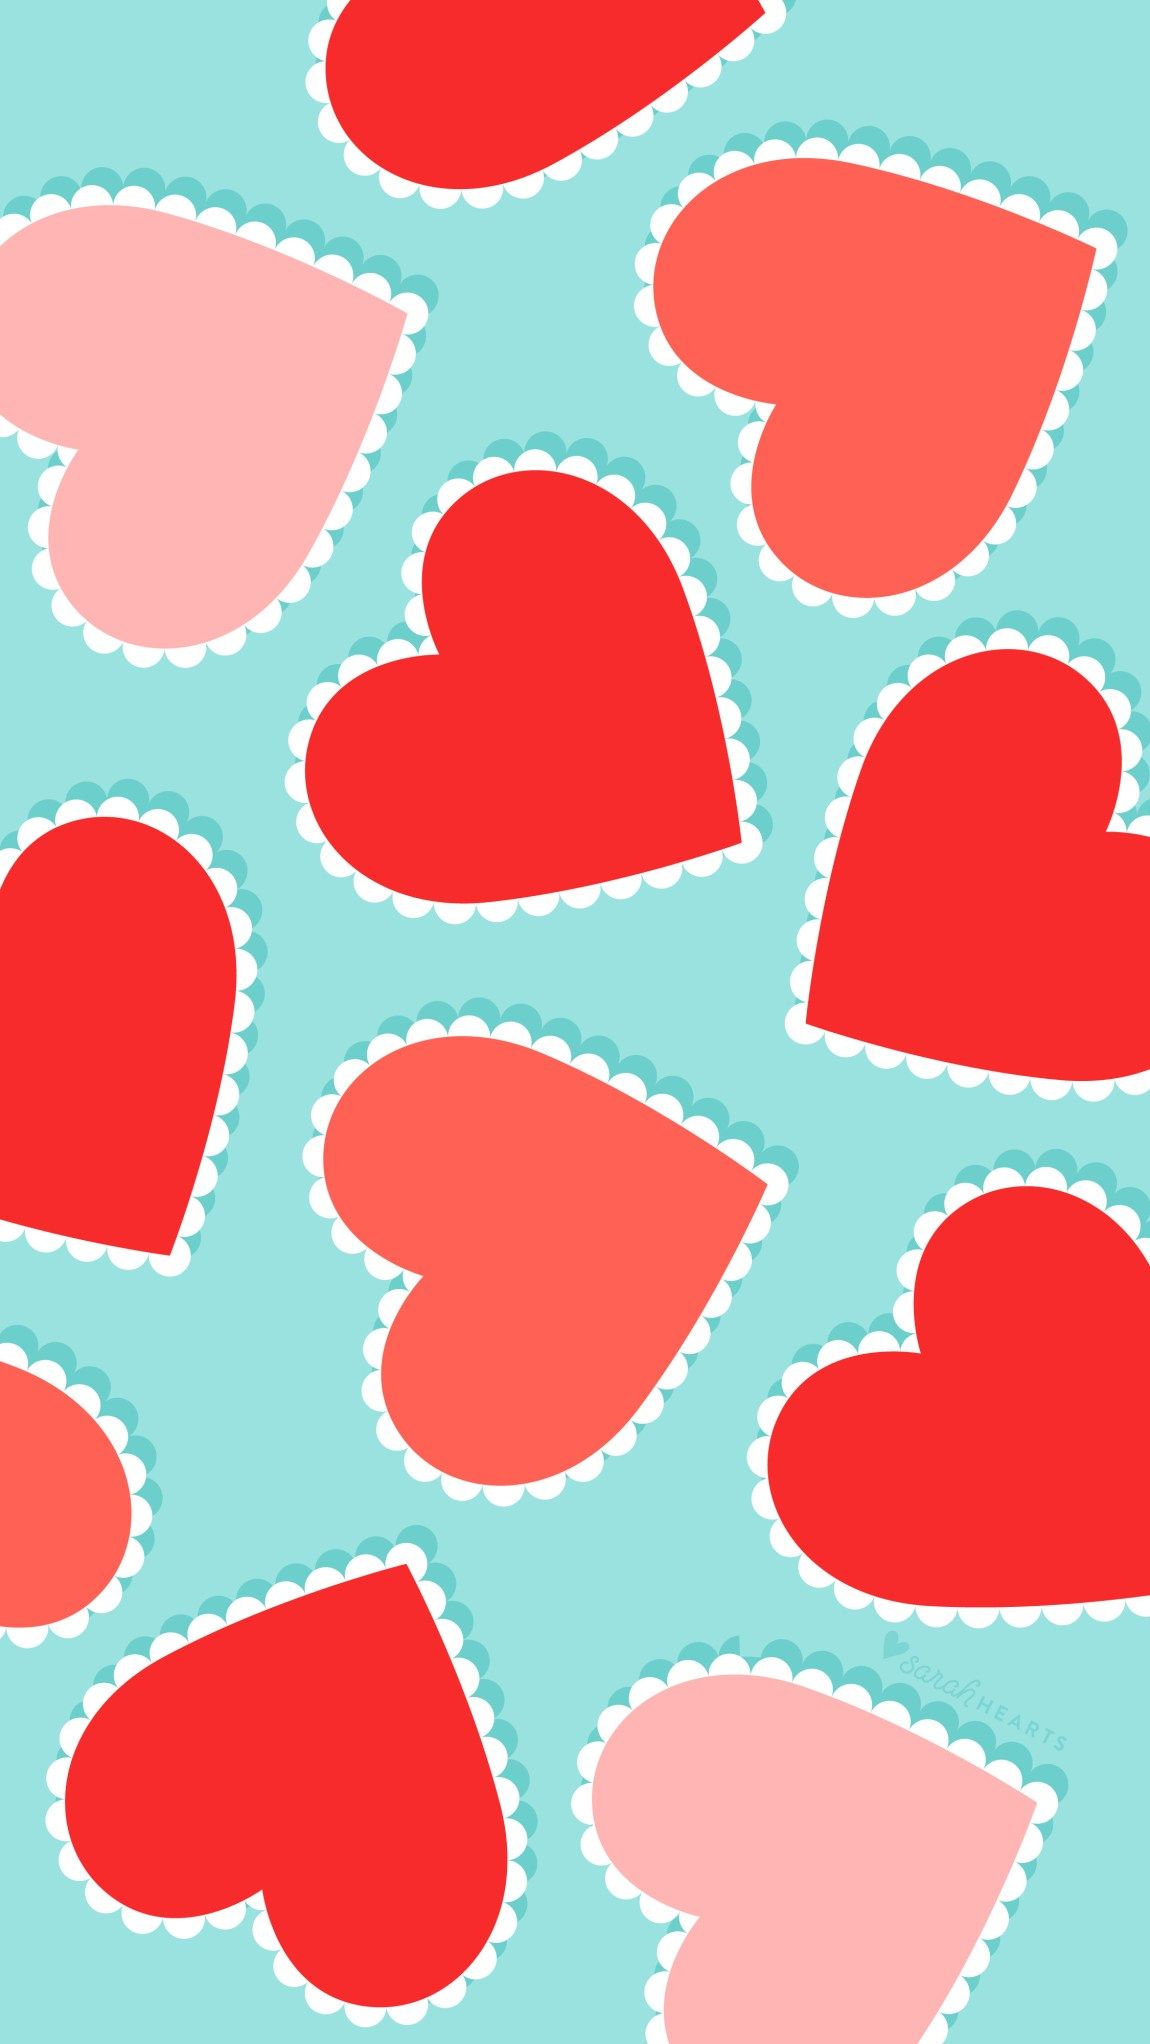 IPhone wallpaper with red hearts on a blue background - Valentine's Day